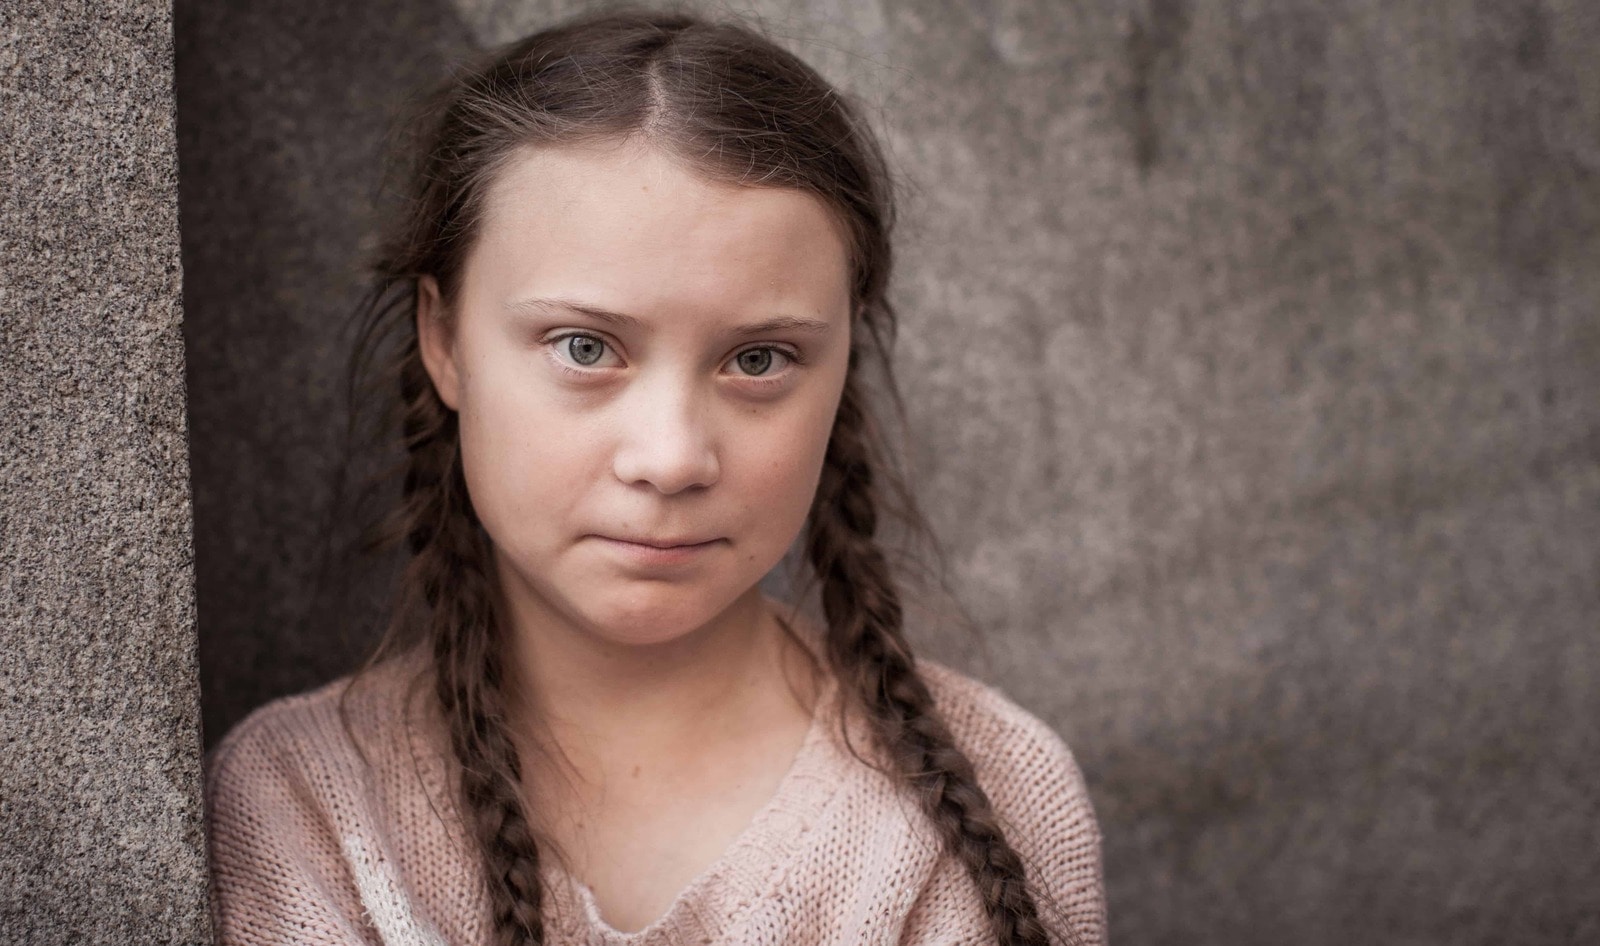 Vegan Climate Activist Greta Thunberg Becomes TIME’s Youngest “Person of the Year”&nbsp;